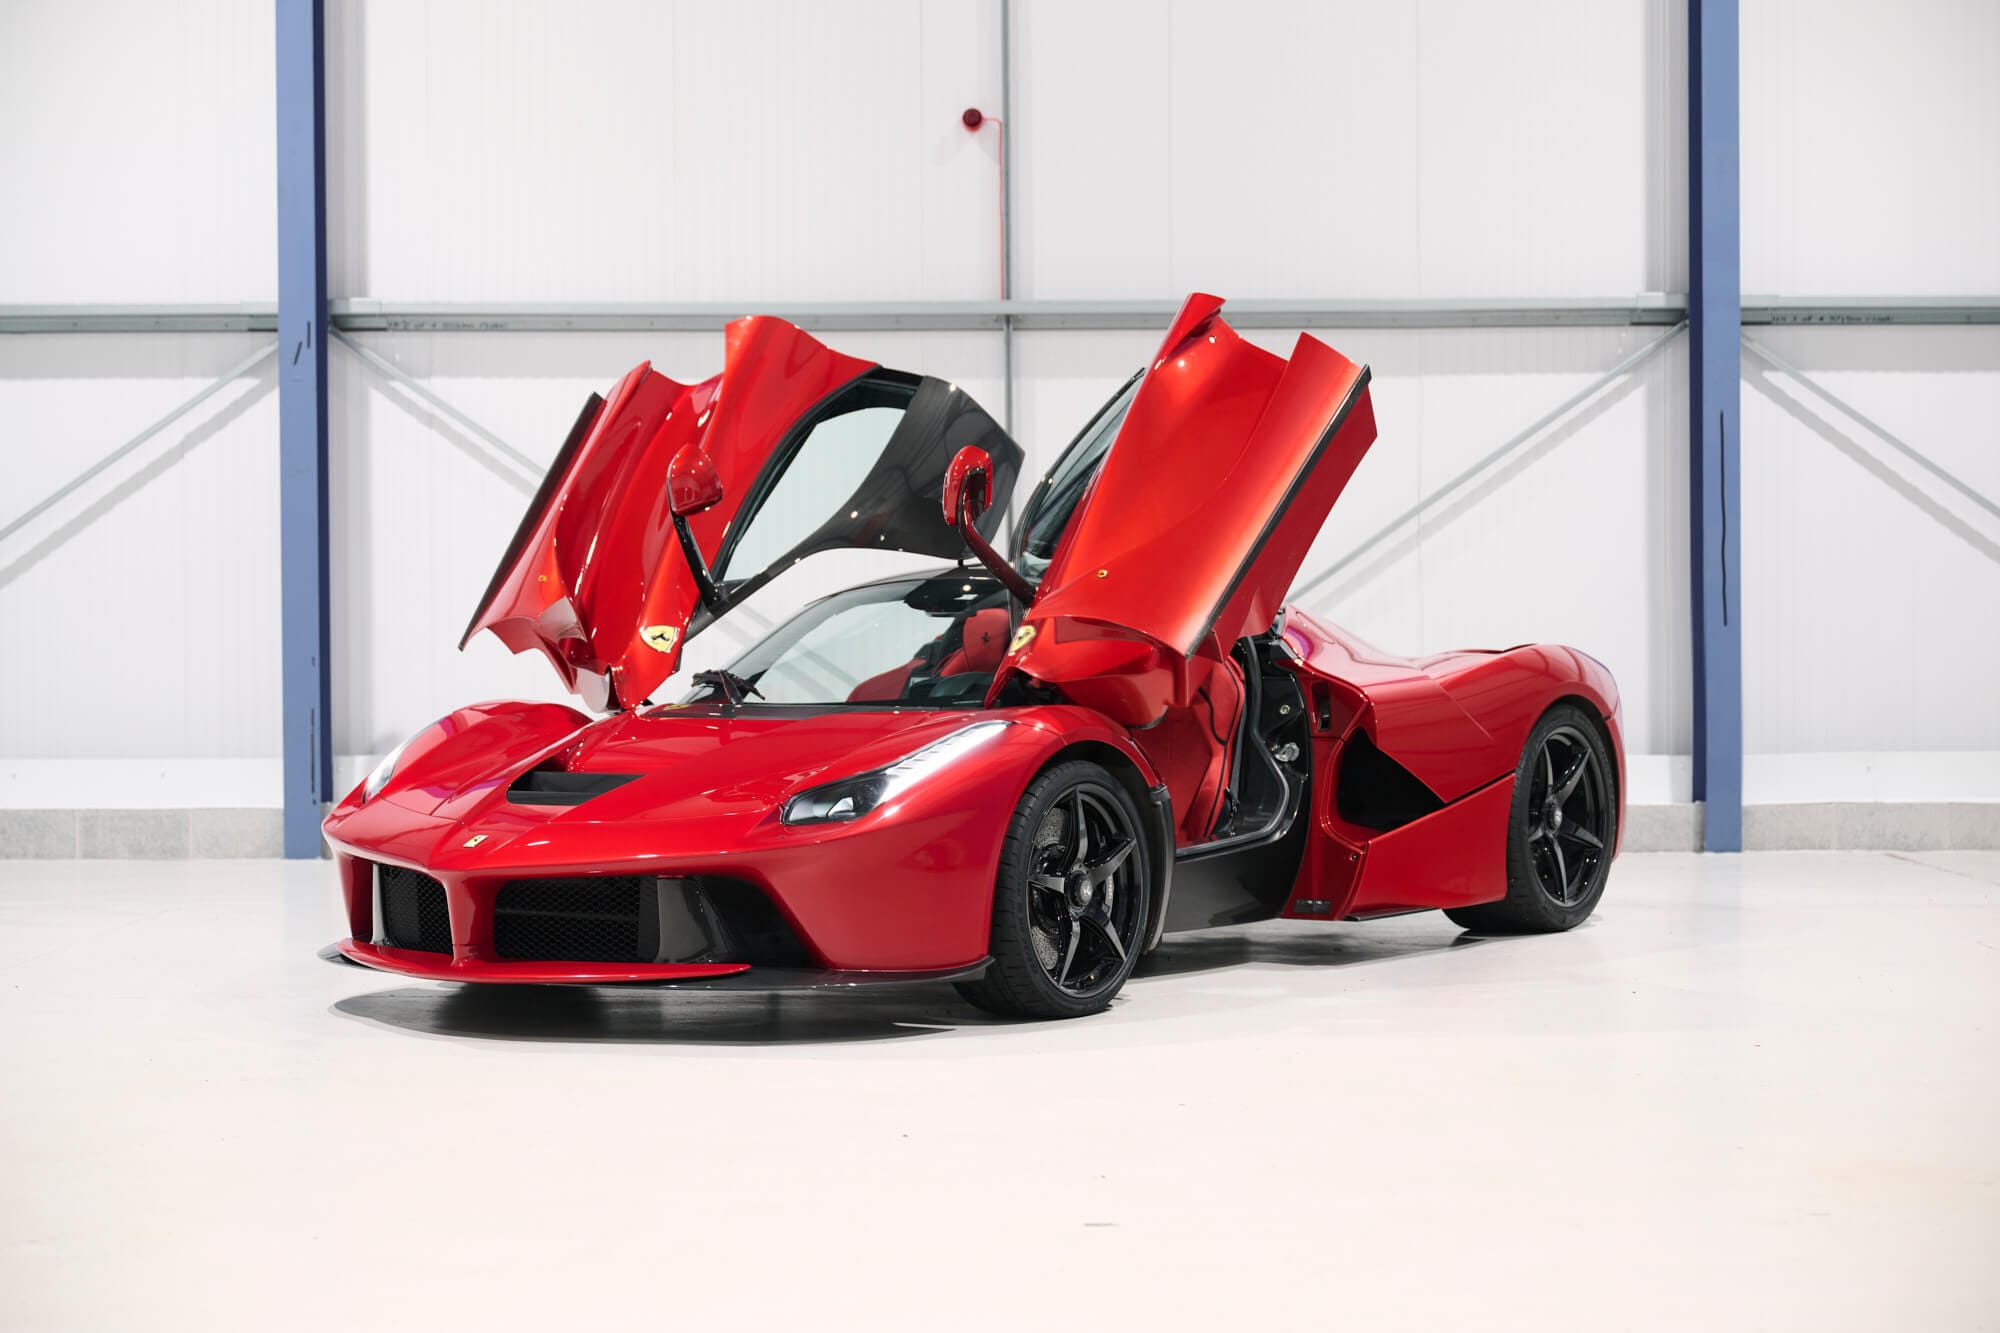 Red sports car with upward-opening doors in an indoor setting, showcasing a sleek and modern design.